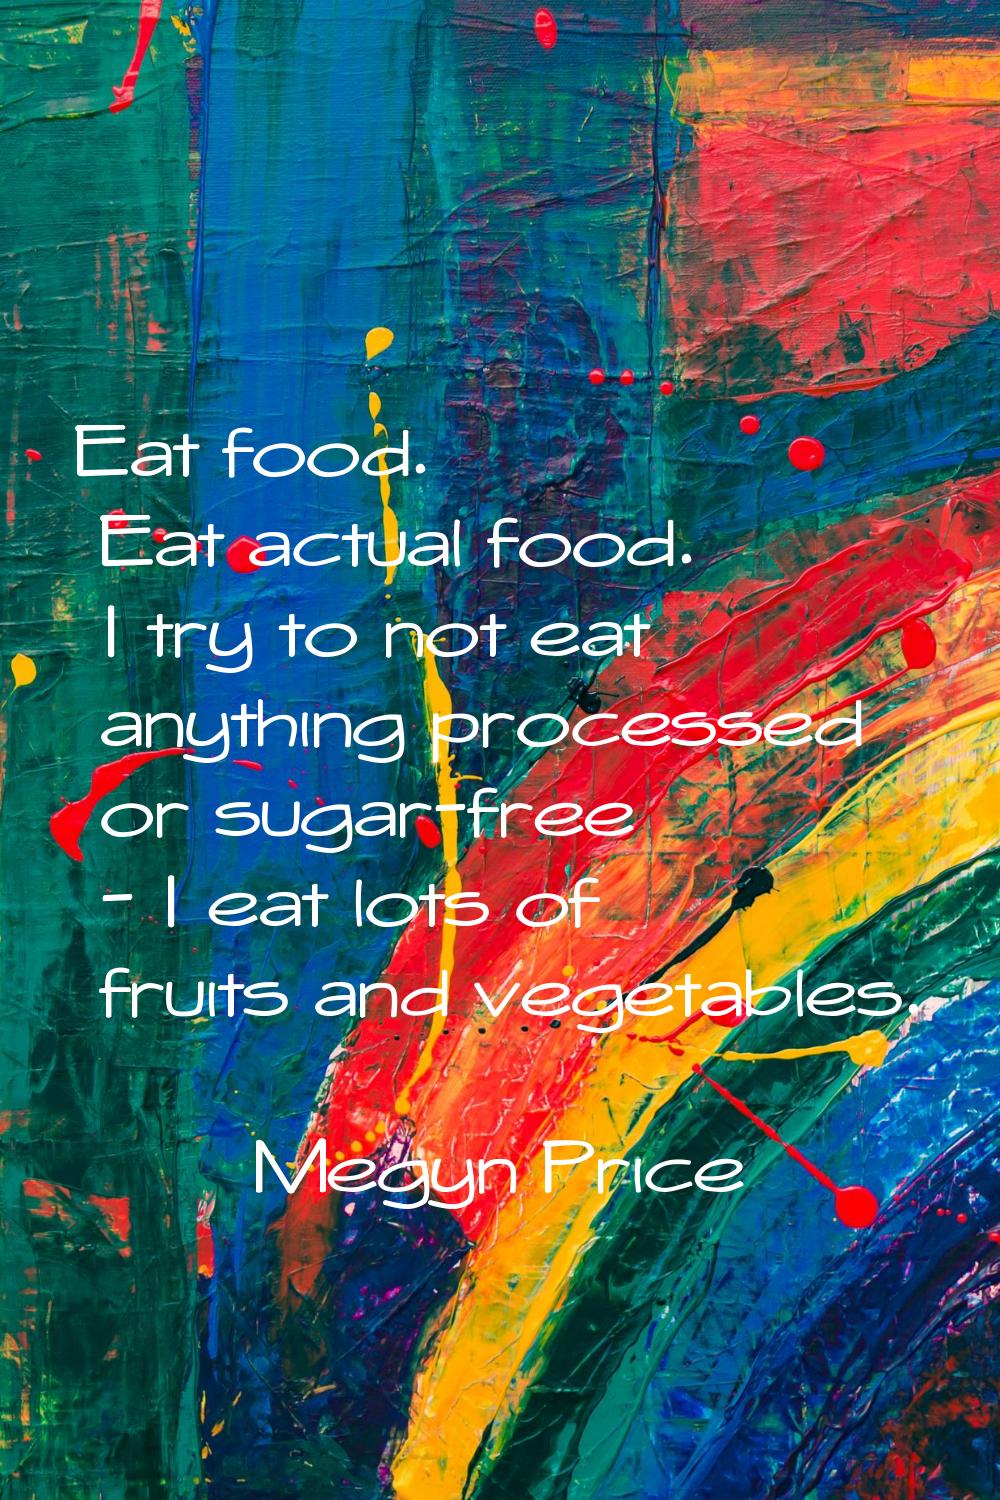 Eat food. Eat actual food. I try to not eat anything processed or sugar-free - I eat lots of fruits